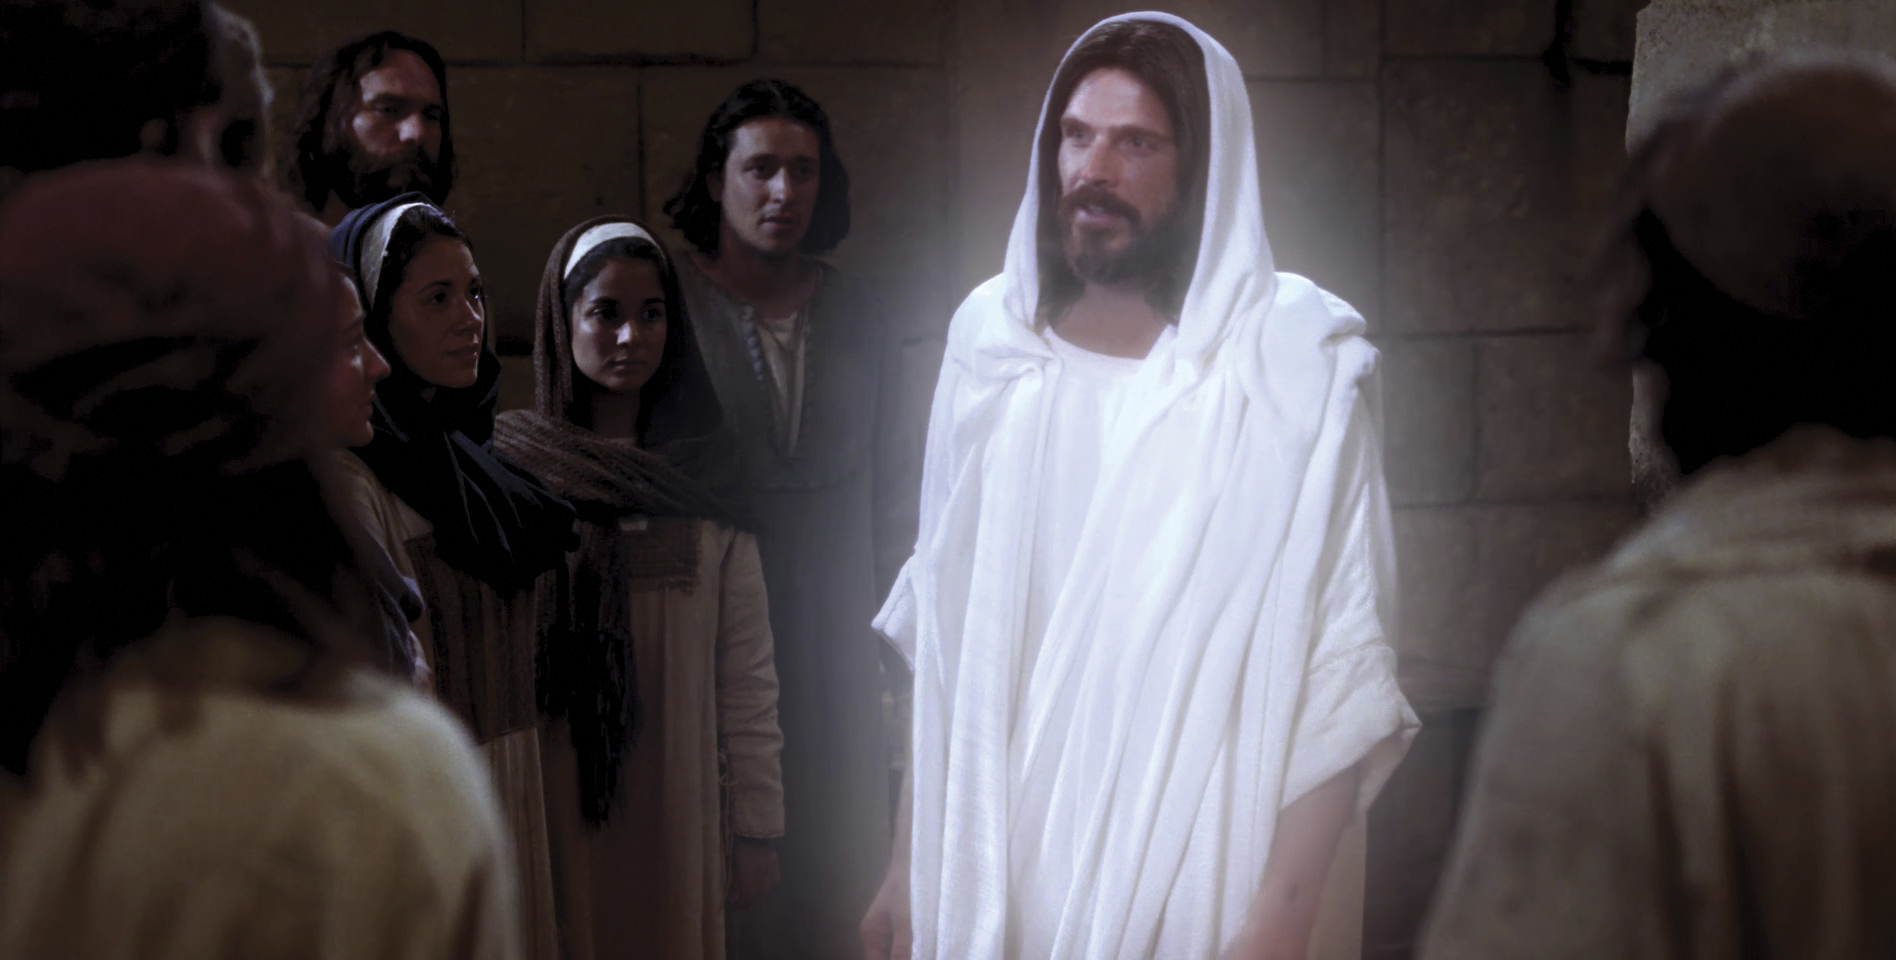 The Resurrected Christ and the Apostles